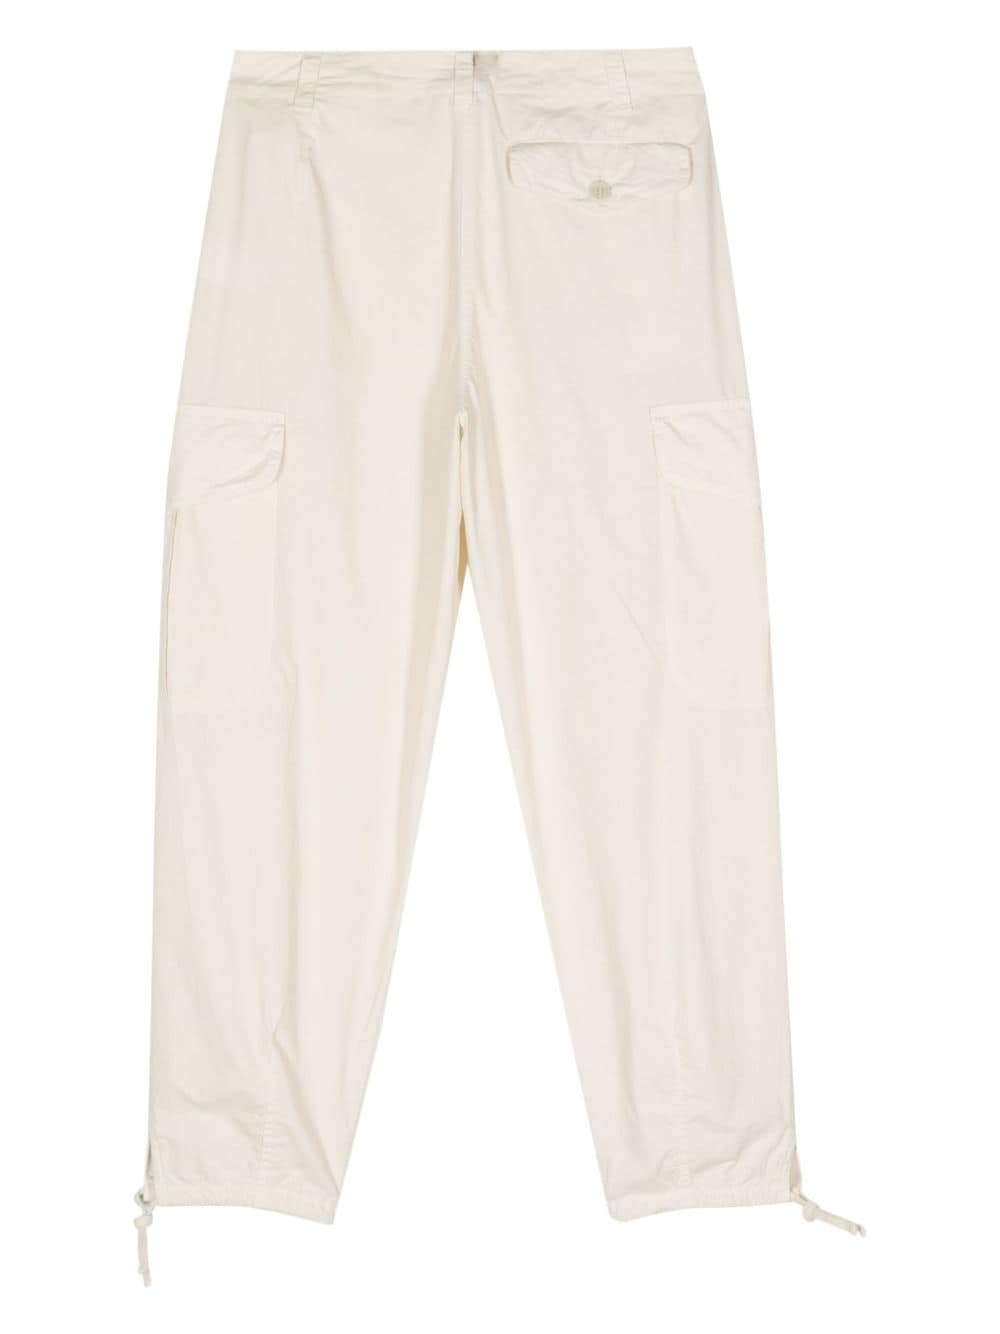 ASPESI tapered cotton cargo trousers - Beige